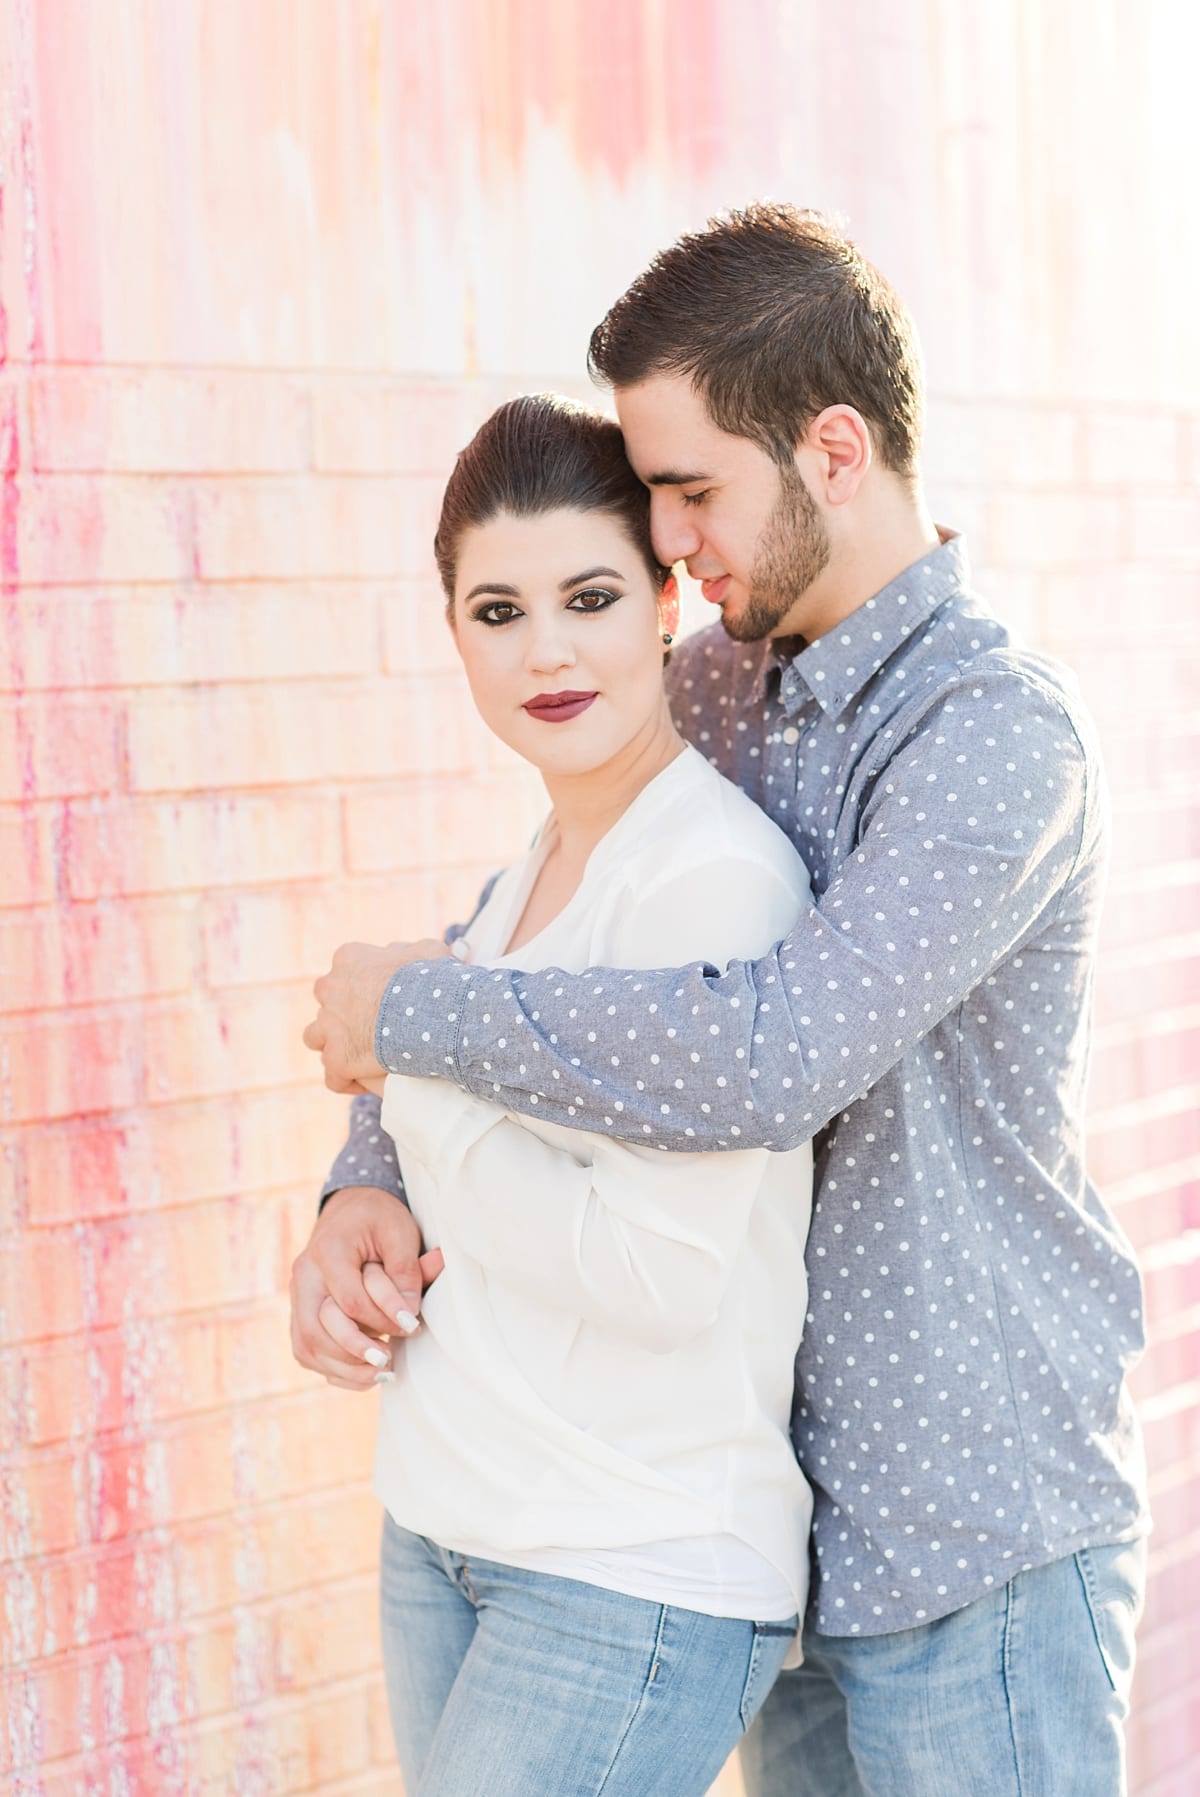 Wynwood-Walls-Engagement-Pictures_0431